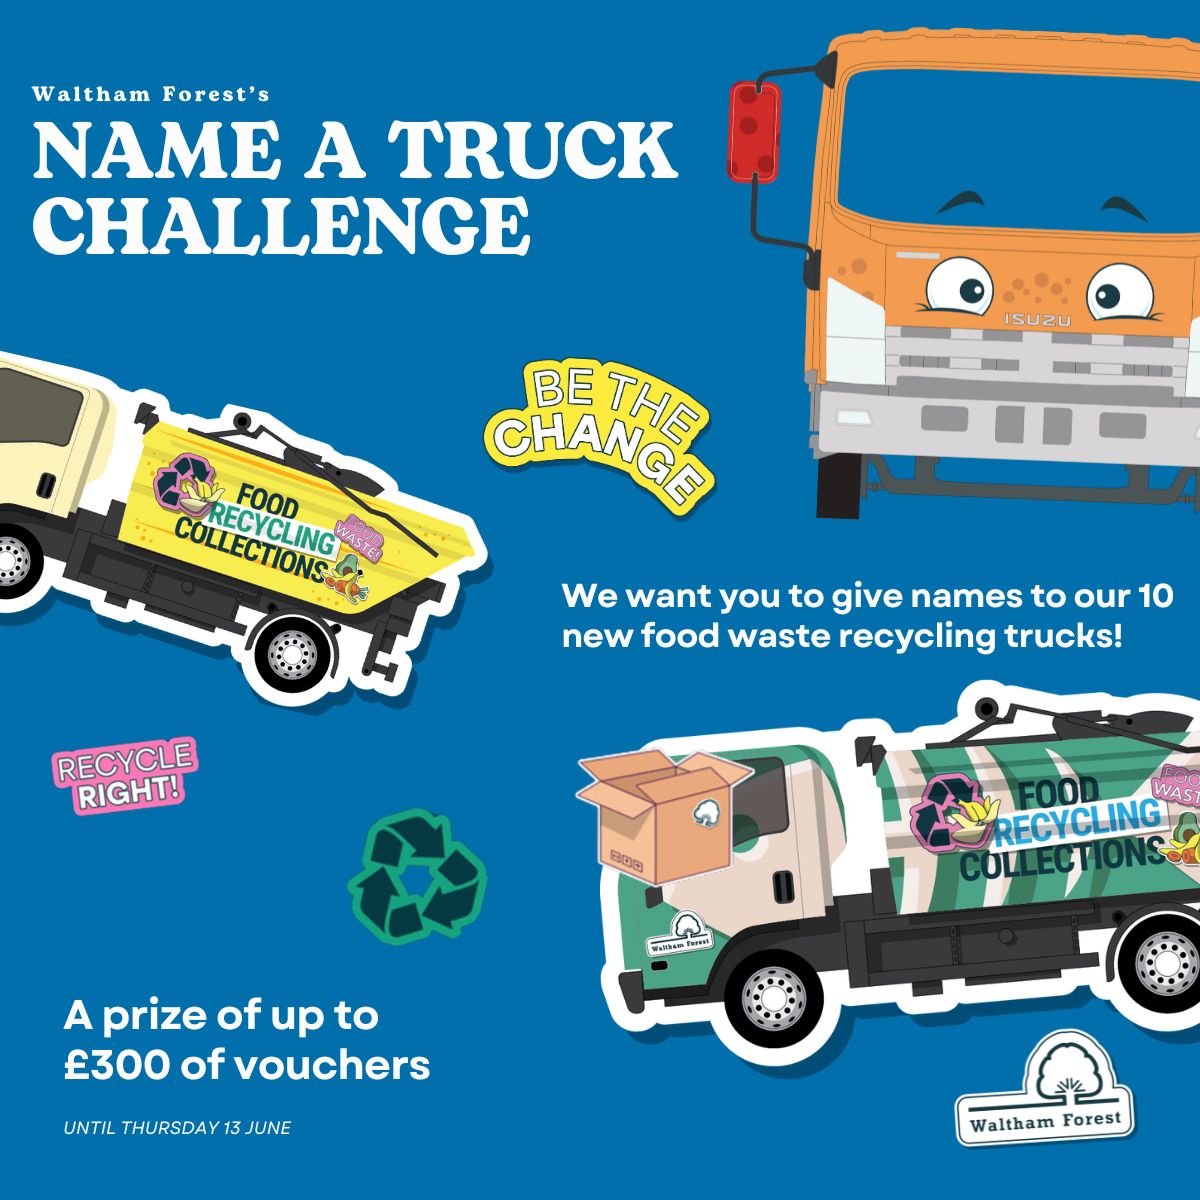 Name a truck to win great prizes! 🚚 A prize of £300 worth of cycle-shop or gift experience vouchers awaits the winner, as well as a £200 voucher for the runner up. 10 of the winning names will be emblazoned on our trucks! Visit orlo.uk/0JVzG to enter!